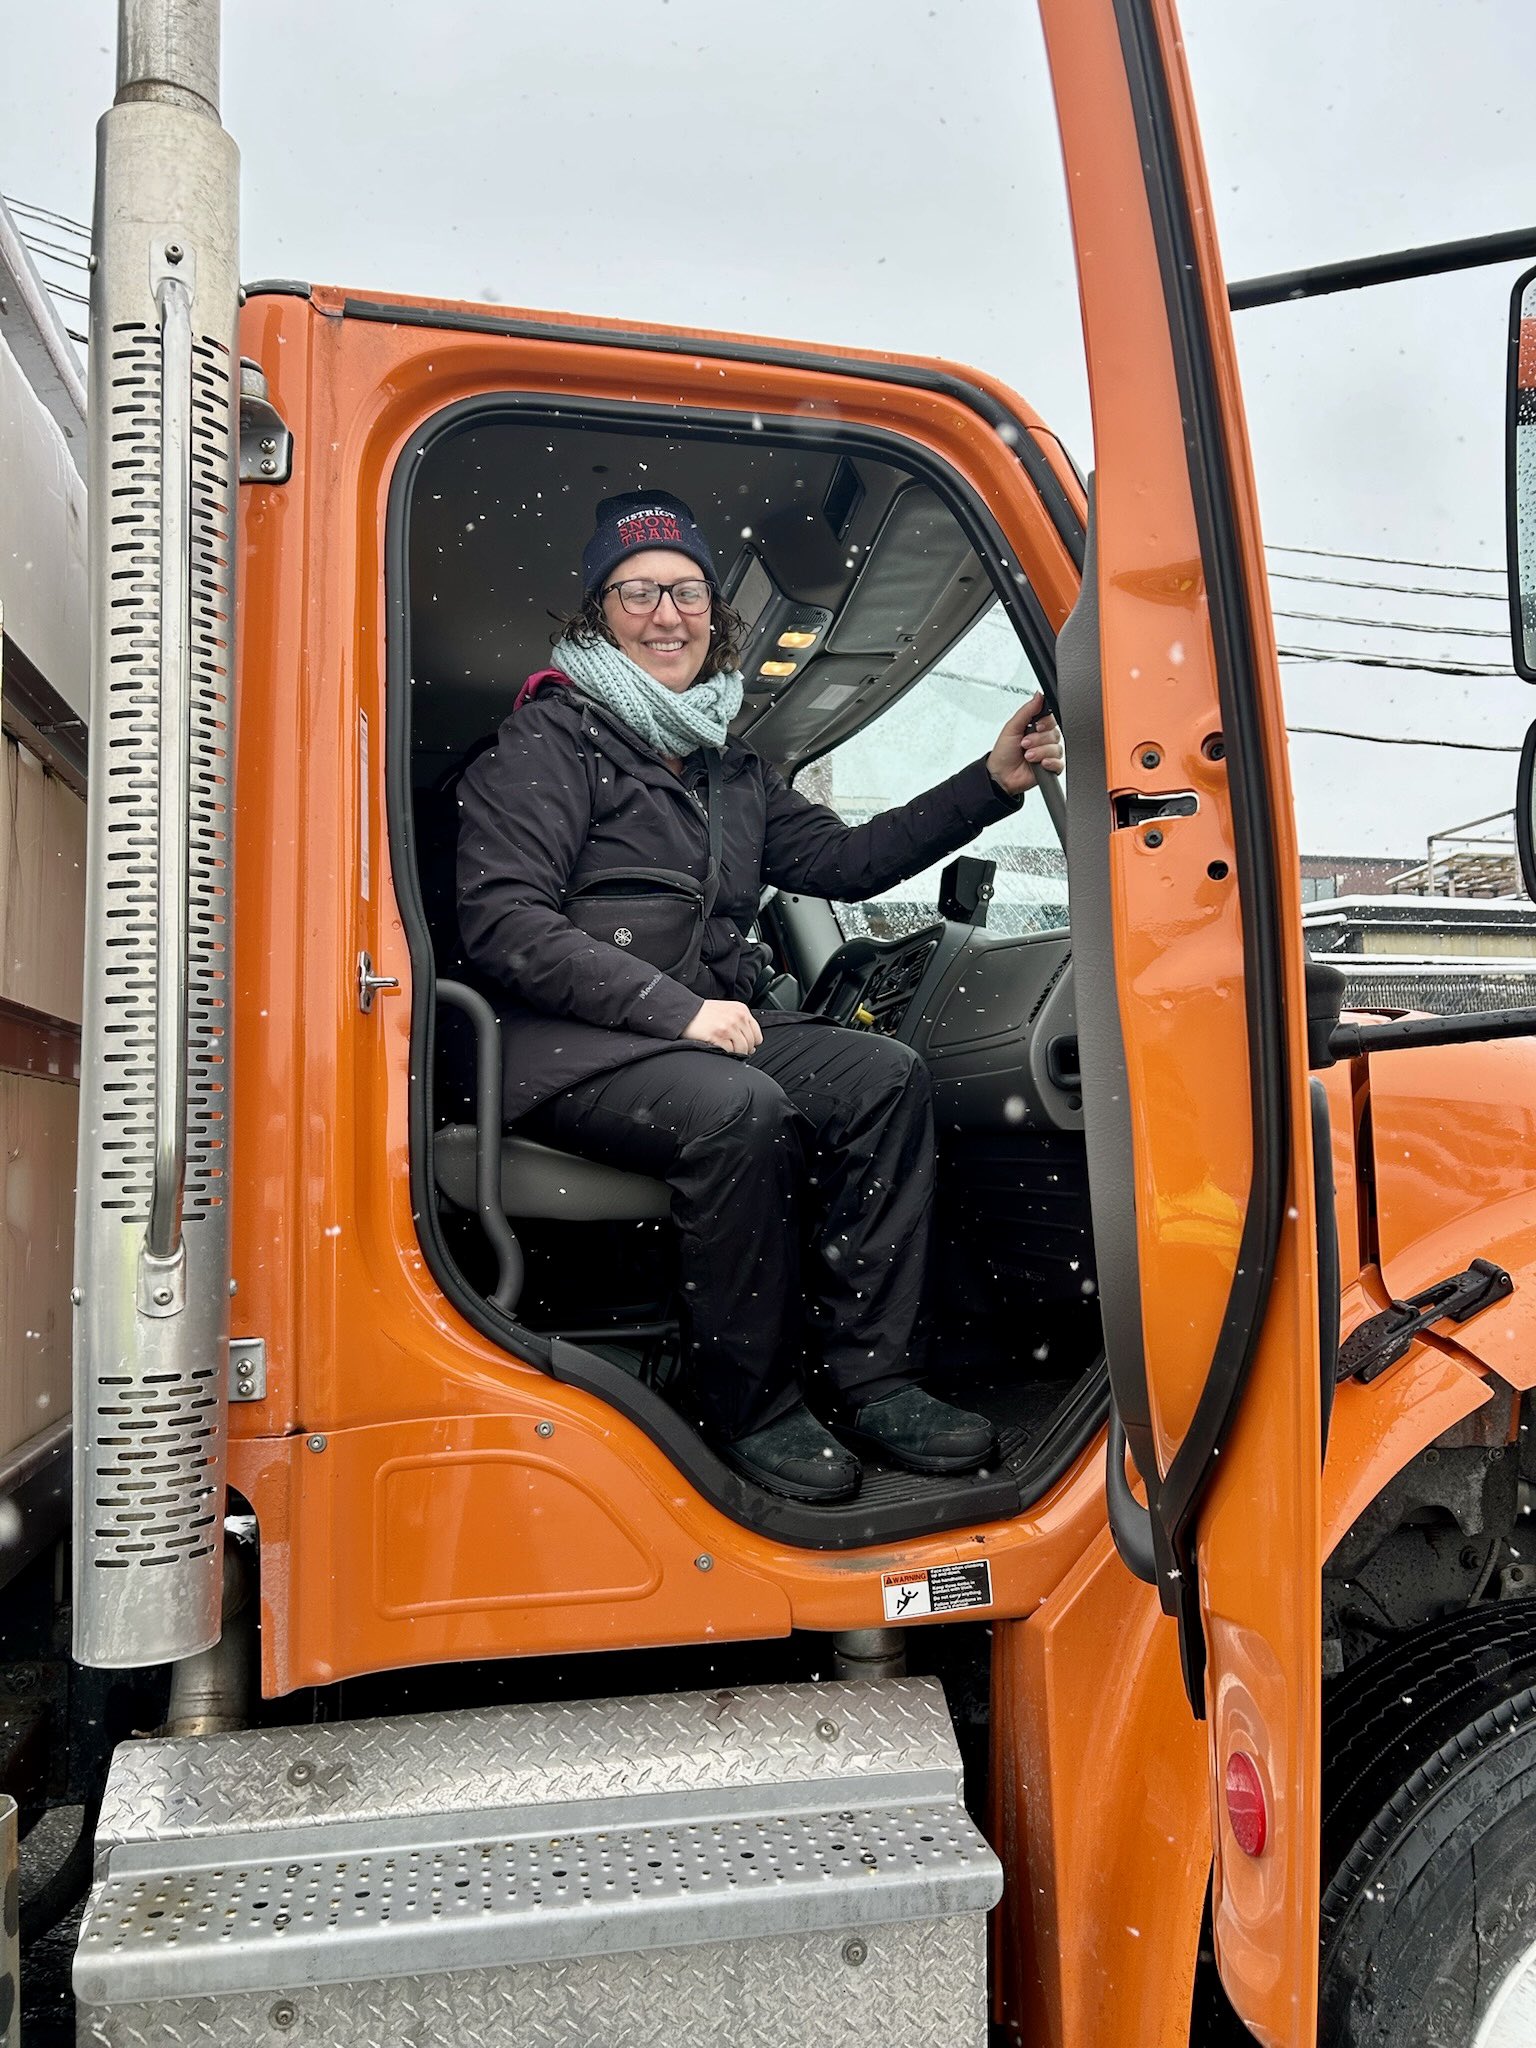 Councilmember Nadeau sits in the passenger side of a parked snow plow, with the bright orange door opened, wearing a winter hat, scarf, winter coat, smilling broadly.